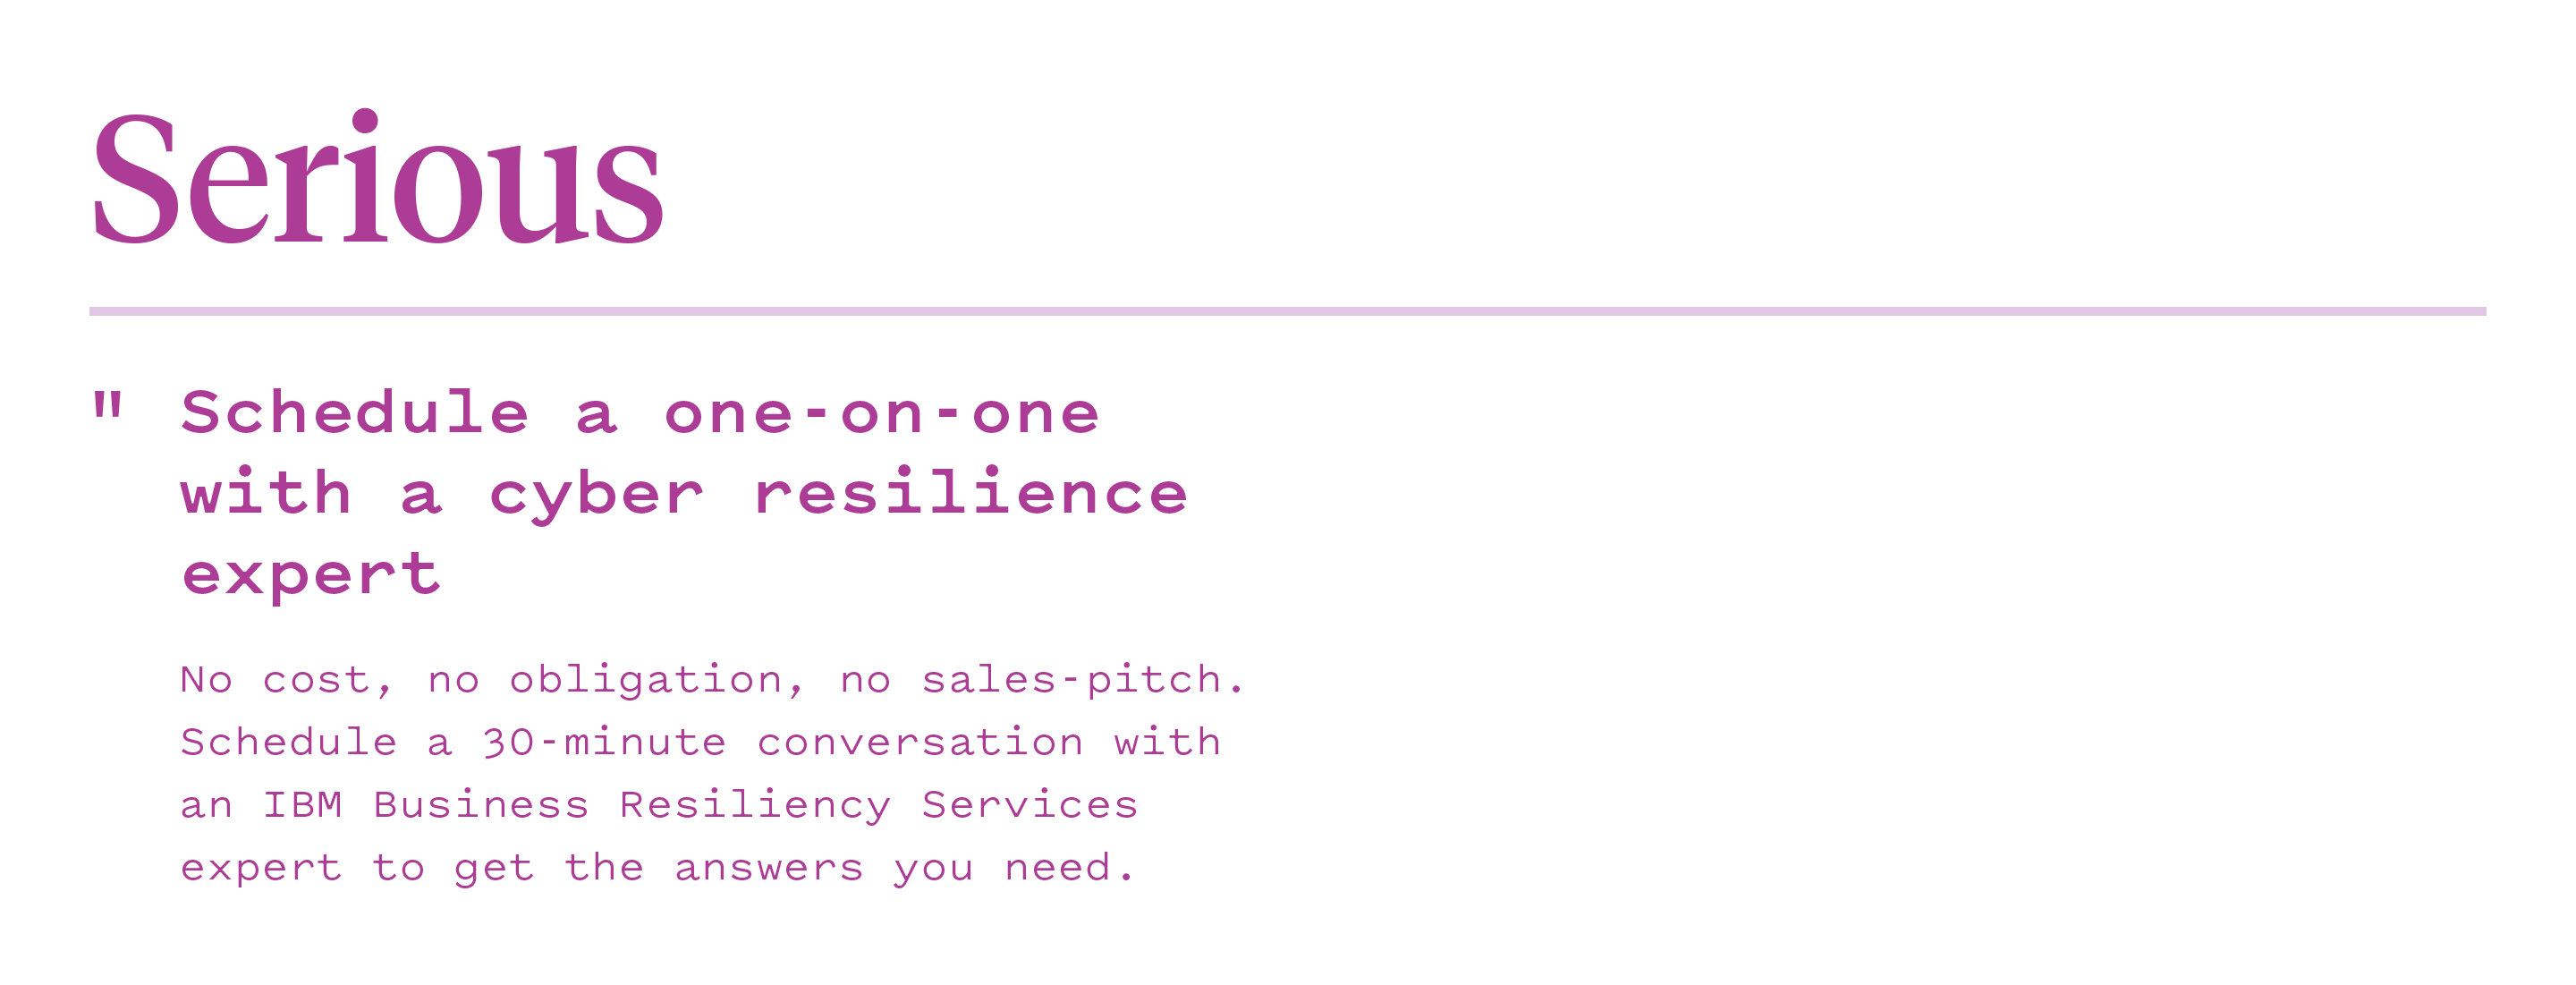 Serious: Schedule a one-on-one with a cyber resilience expert. No cost, no obligation, no sales pitch. Schedule a 30-minute conversation with an IBM Business resiliency services expert to get the answers you need. 